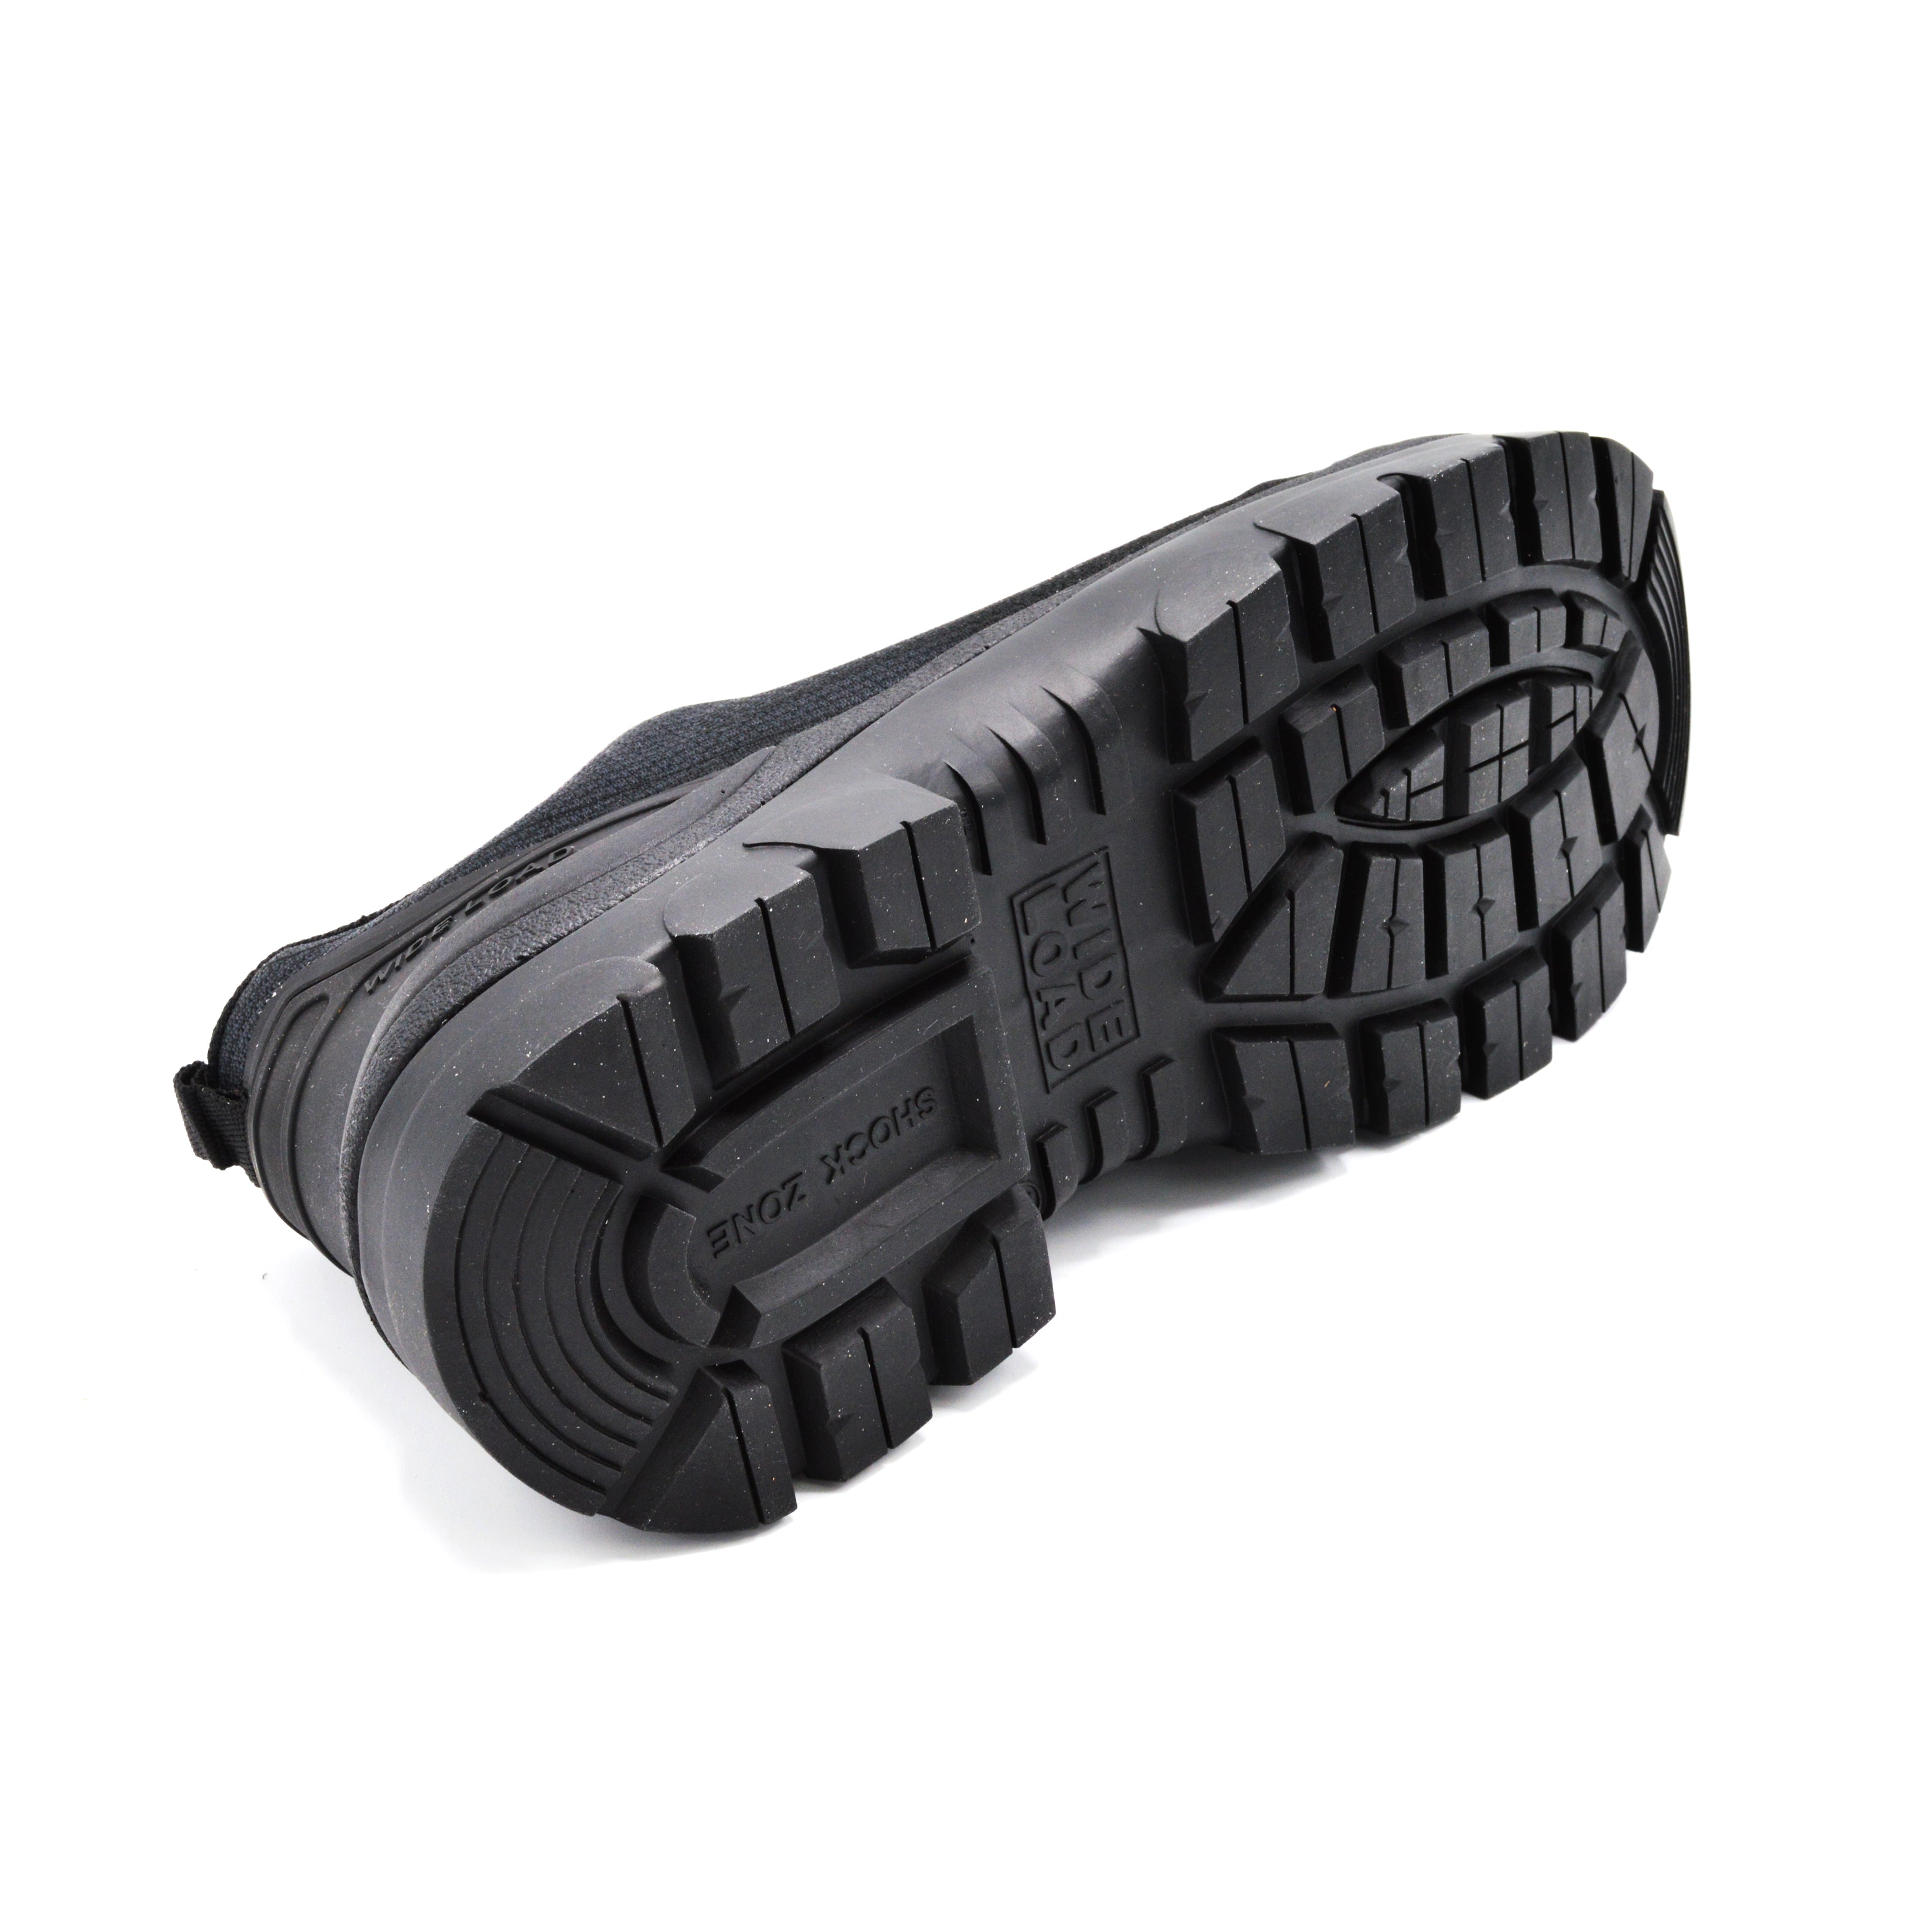 Extra Wide Safety Shoe 6E Fitting